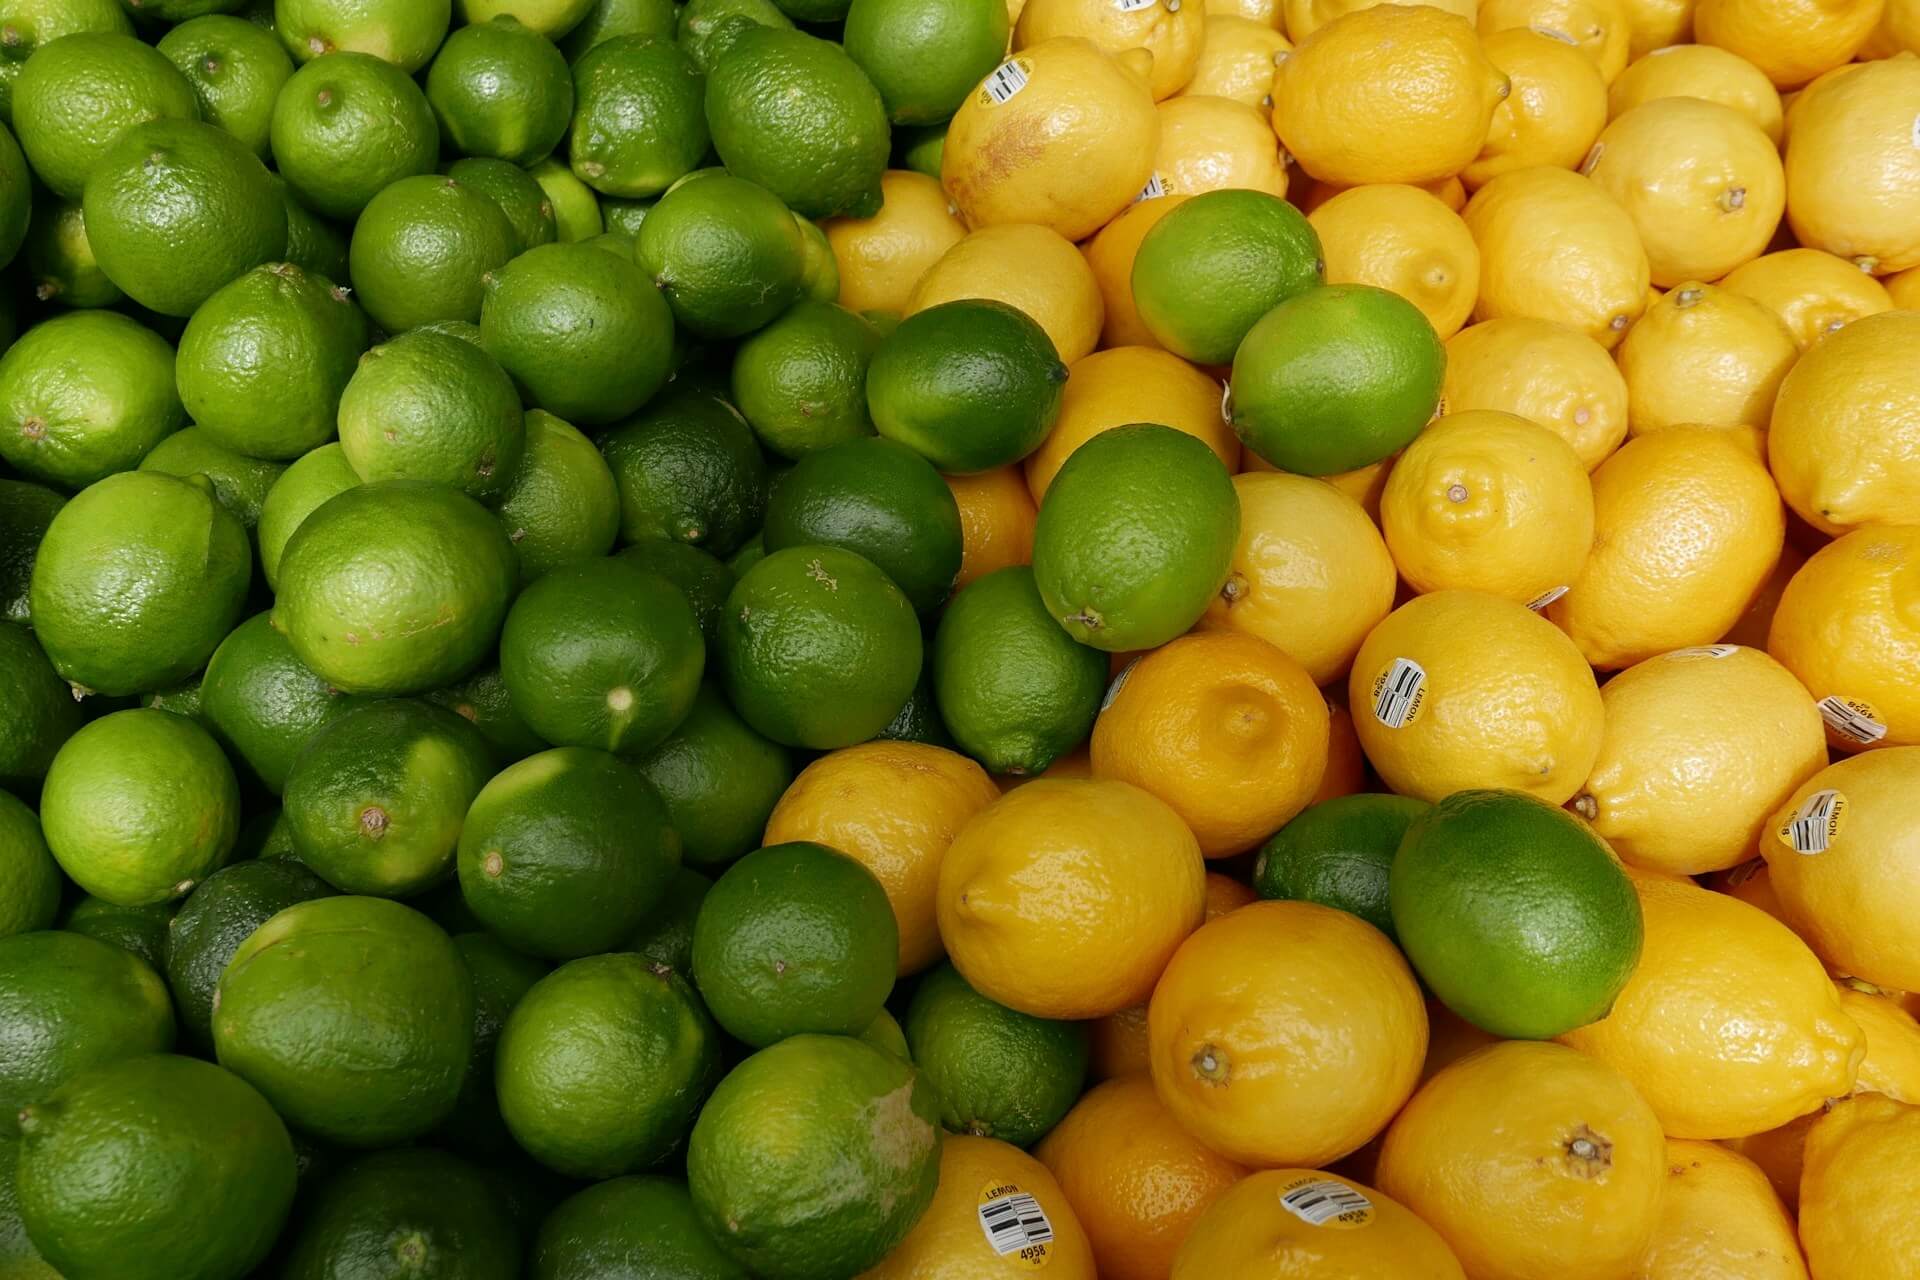 A bunch of limes and lemons